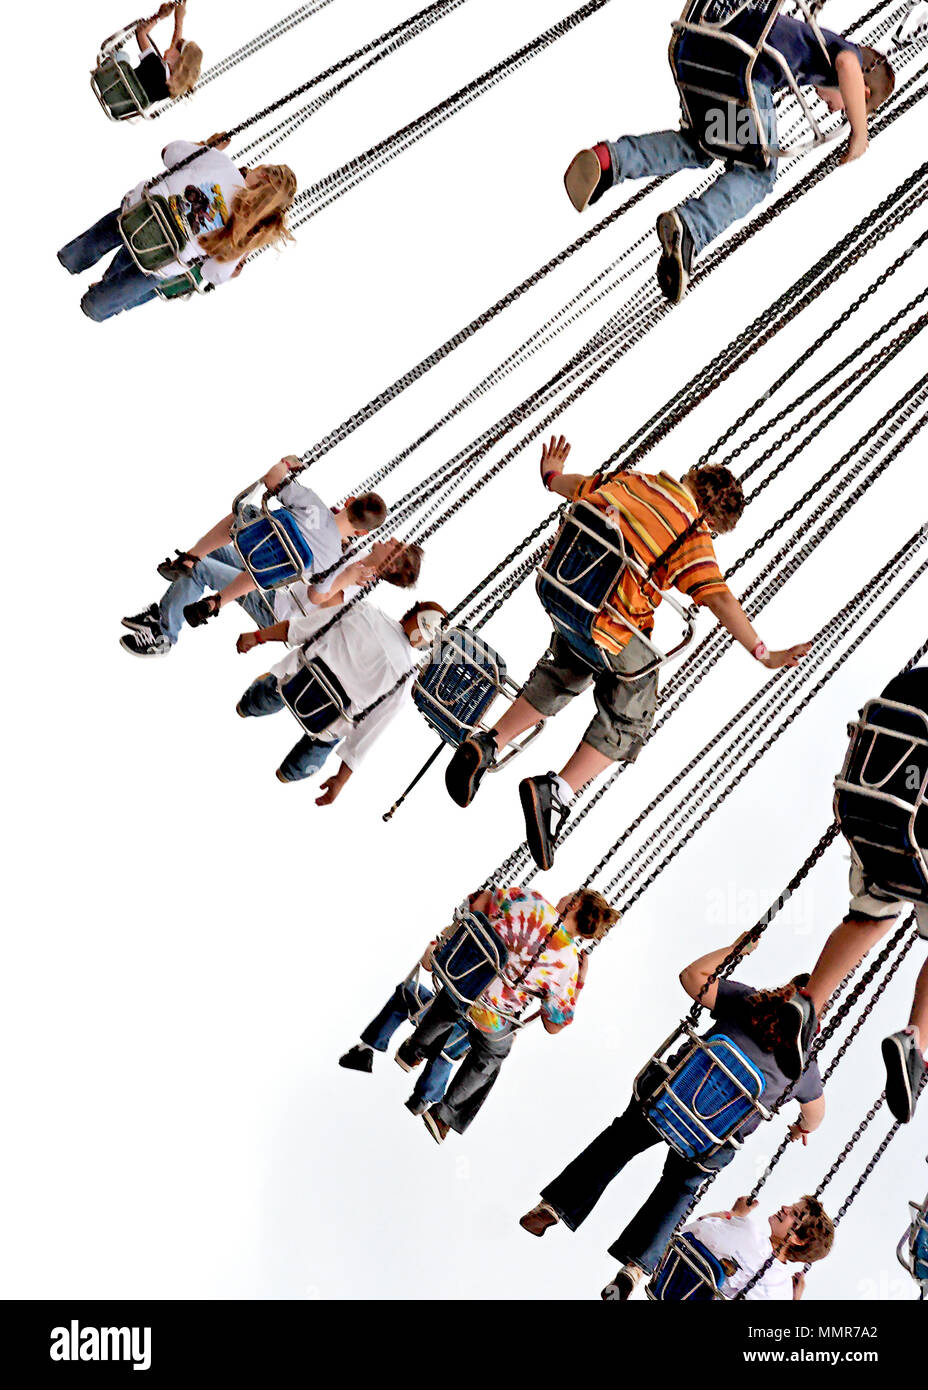 Rear view of children swinging on amusement park swing ride. Focus on boy with arms flying free. Stock Photo